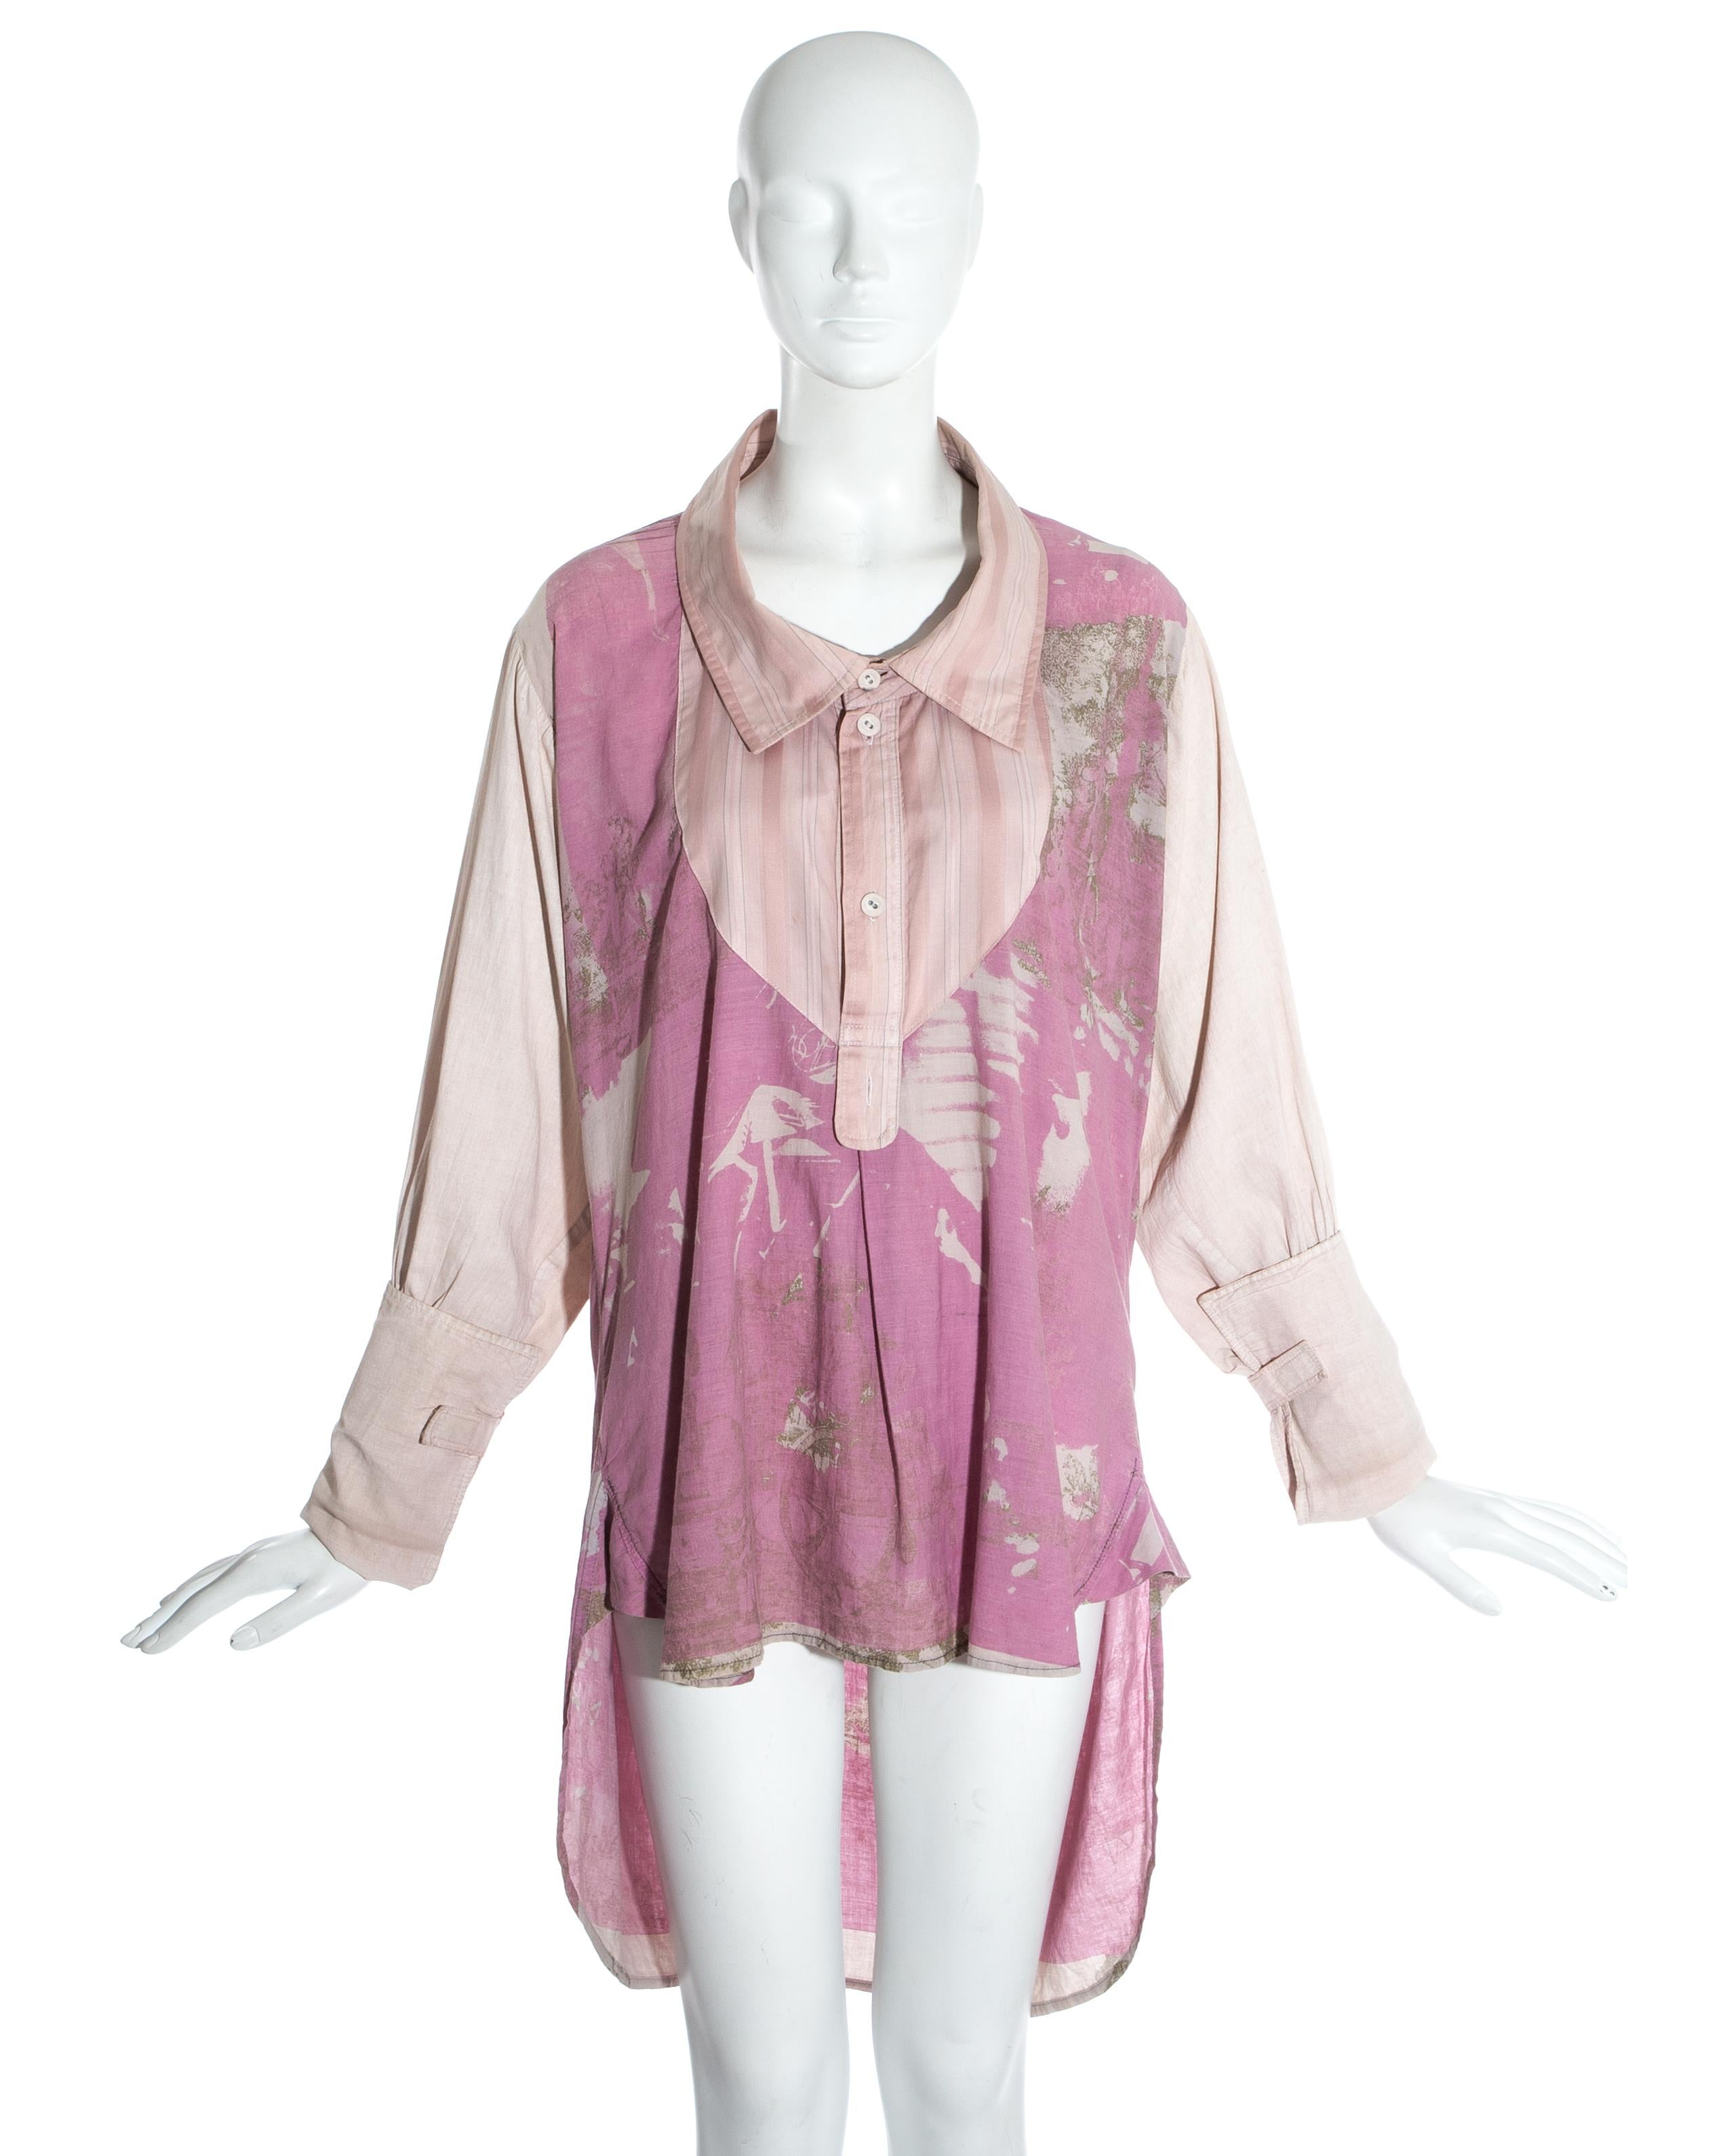 Worlds End by Vivienne Westwood and Malcolm McLaren. Pink cotton oversized blouse. Oversized turn up cuffs with Velcro fastening,  signature using Blade Runner (1982, dir. Ridley Scott) film still print and large striped cotton yoke. 

'Punkature'